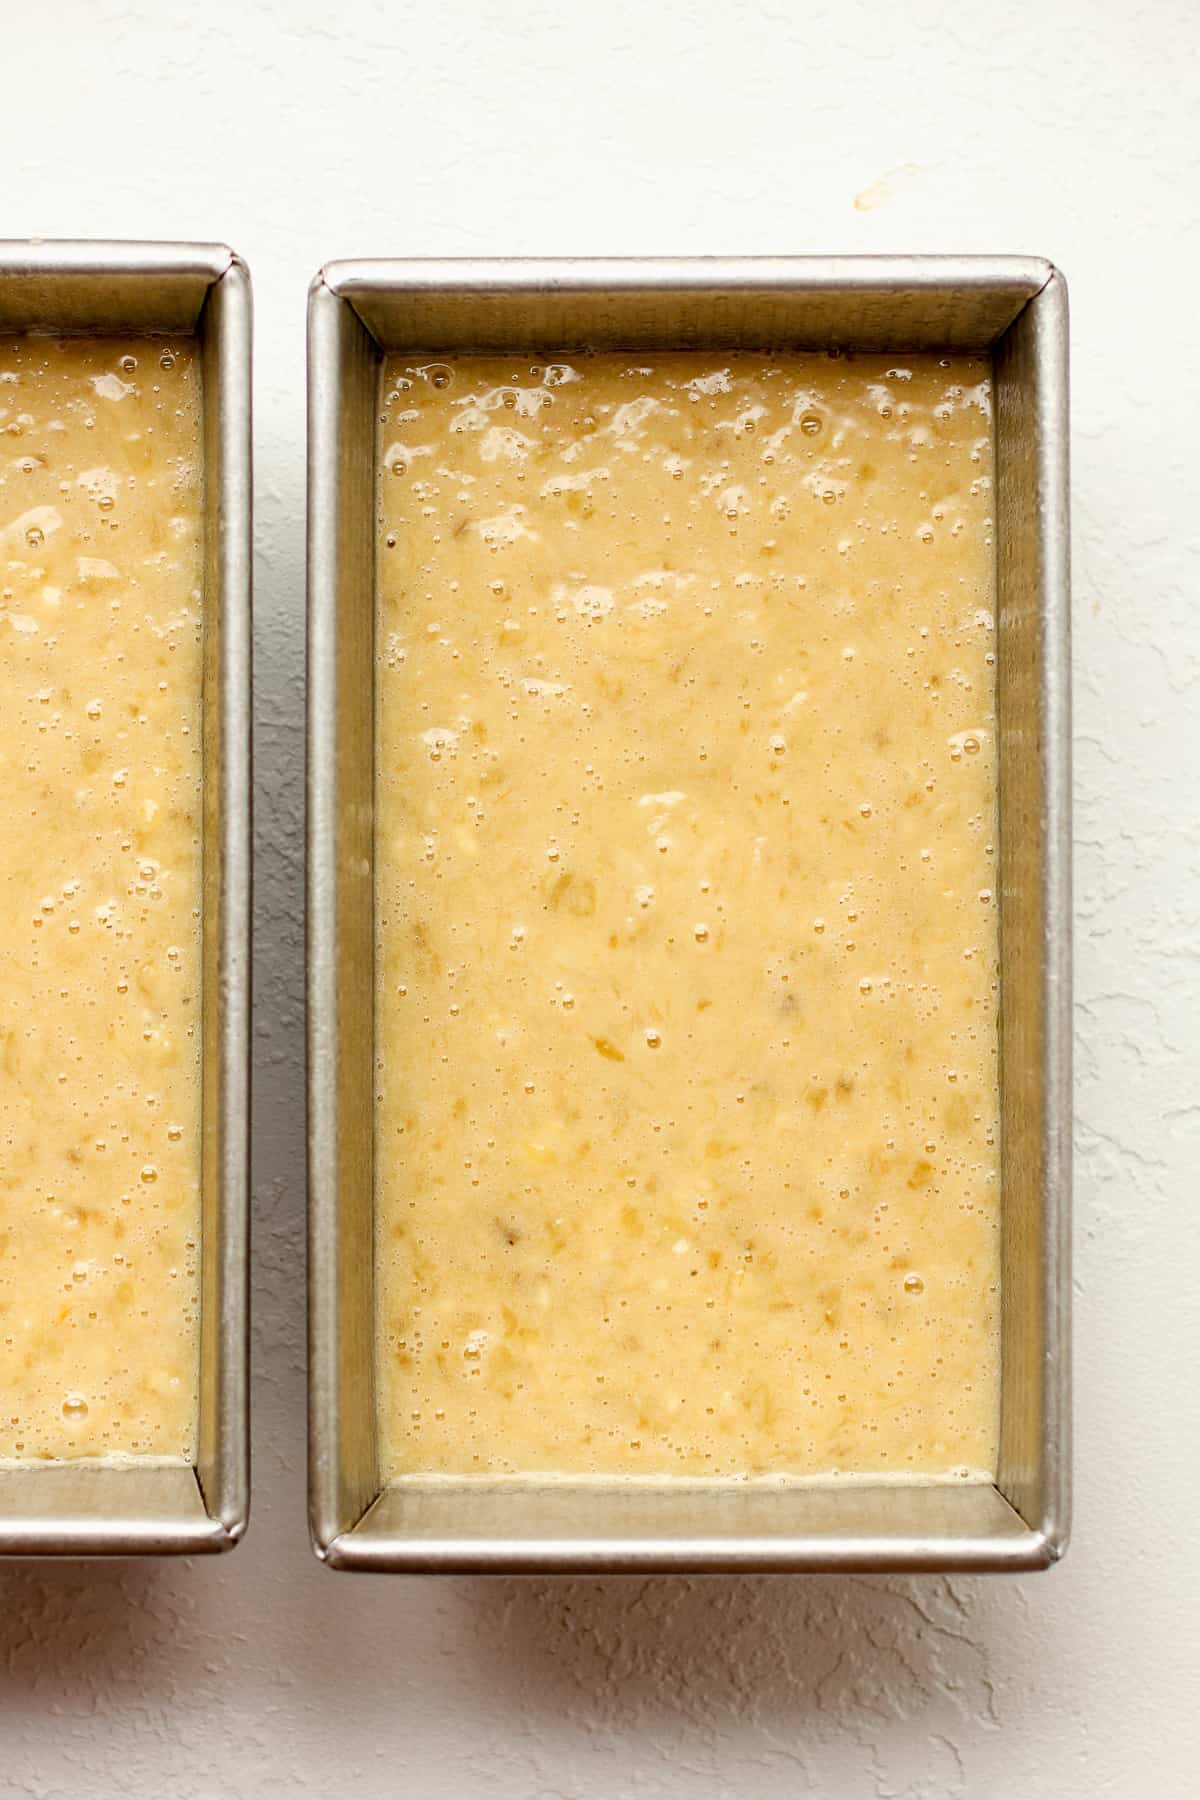 Two pans of the banana batter.